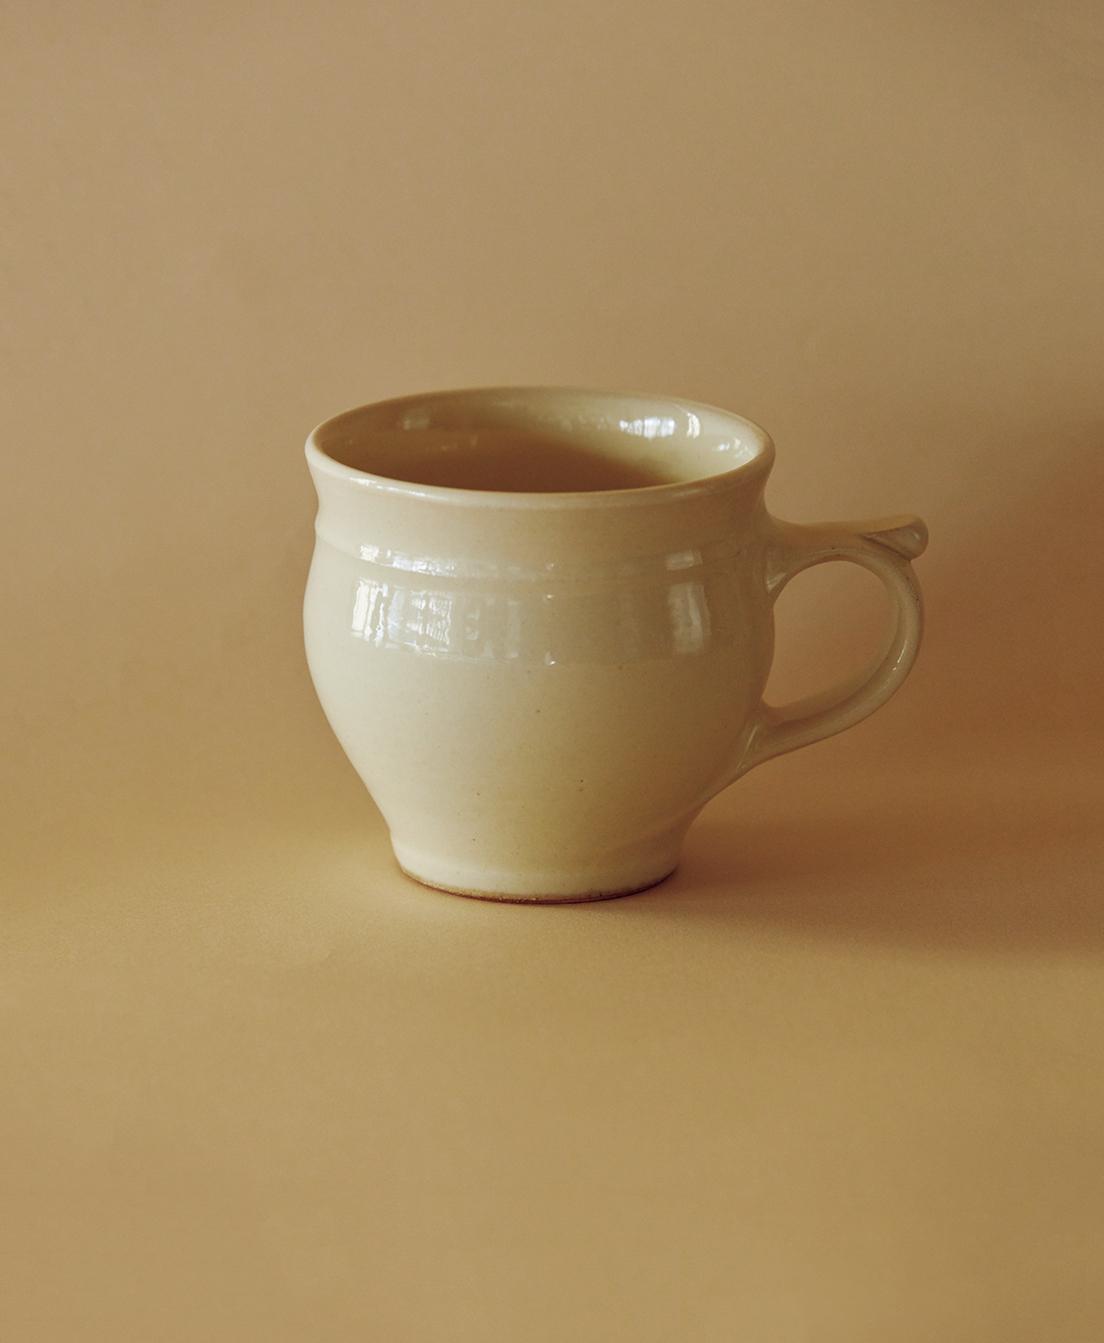 Purchase No. 37【Shussaigama Earthenware Cup】Beauty made to be held, a cup of gentle white hue to greet you in the morning.